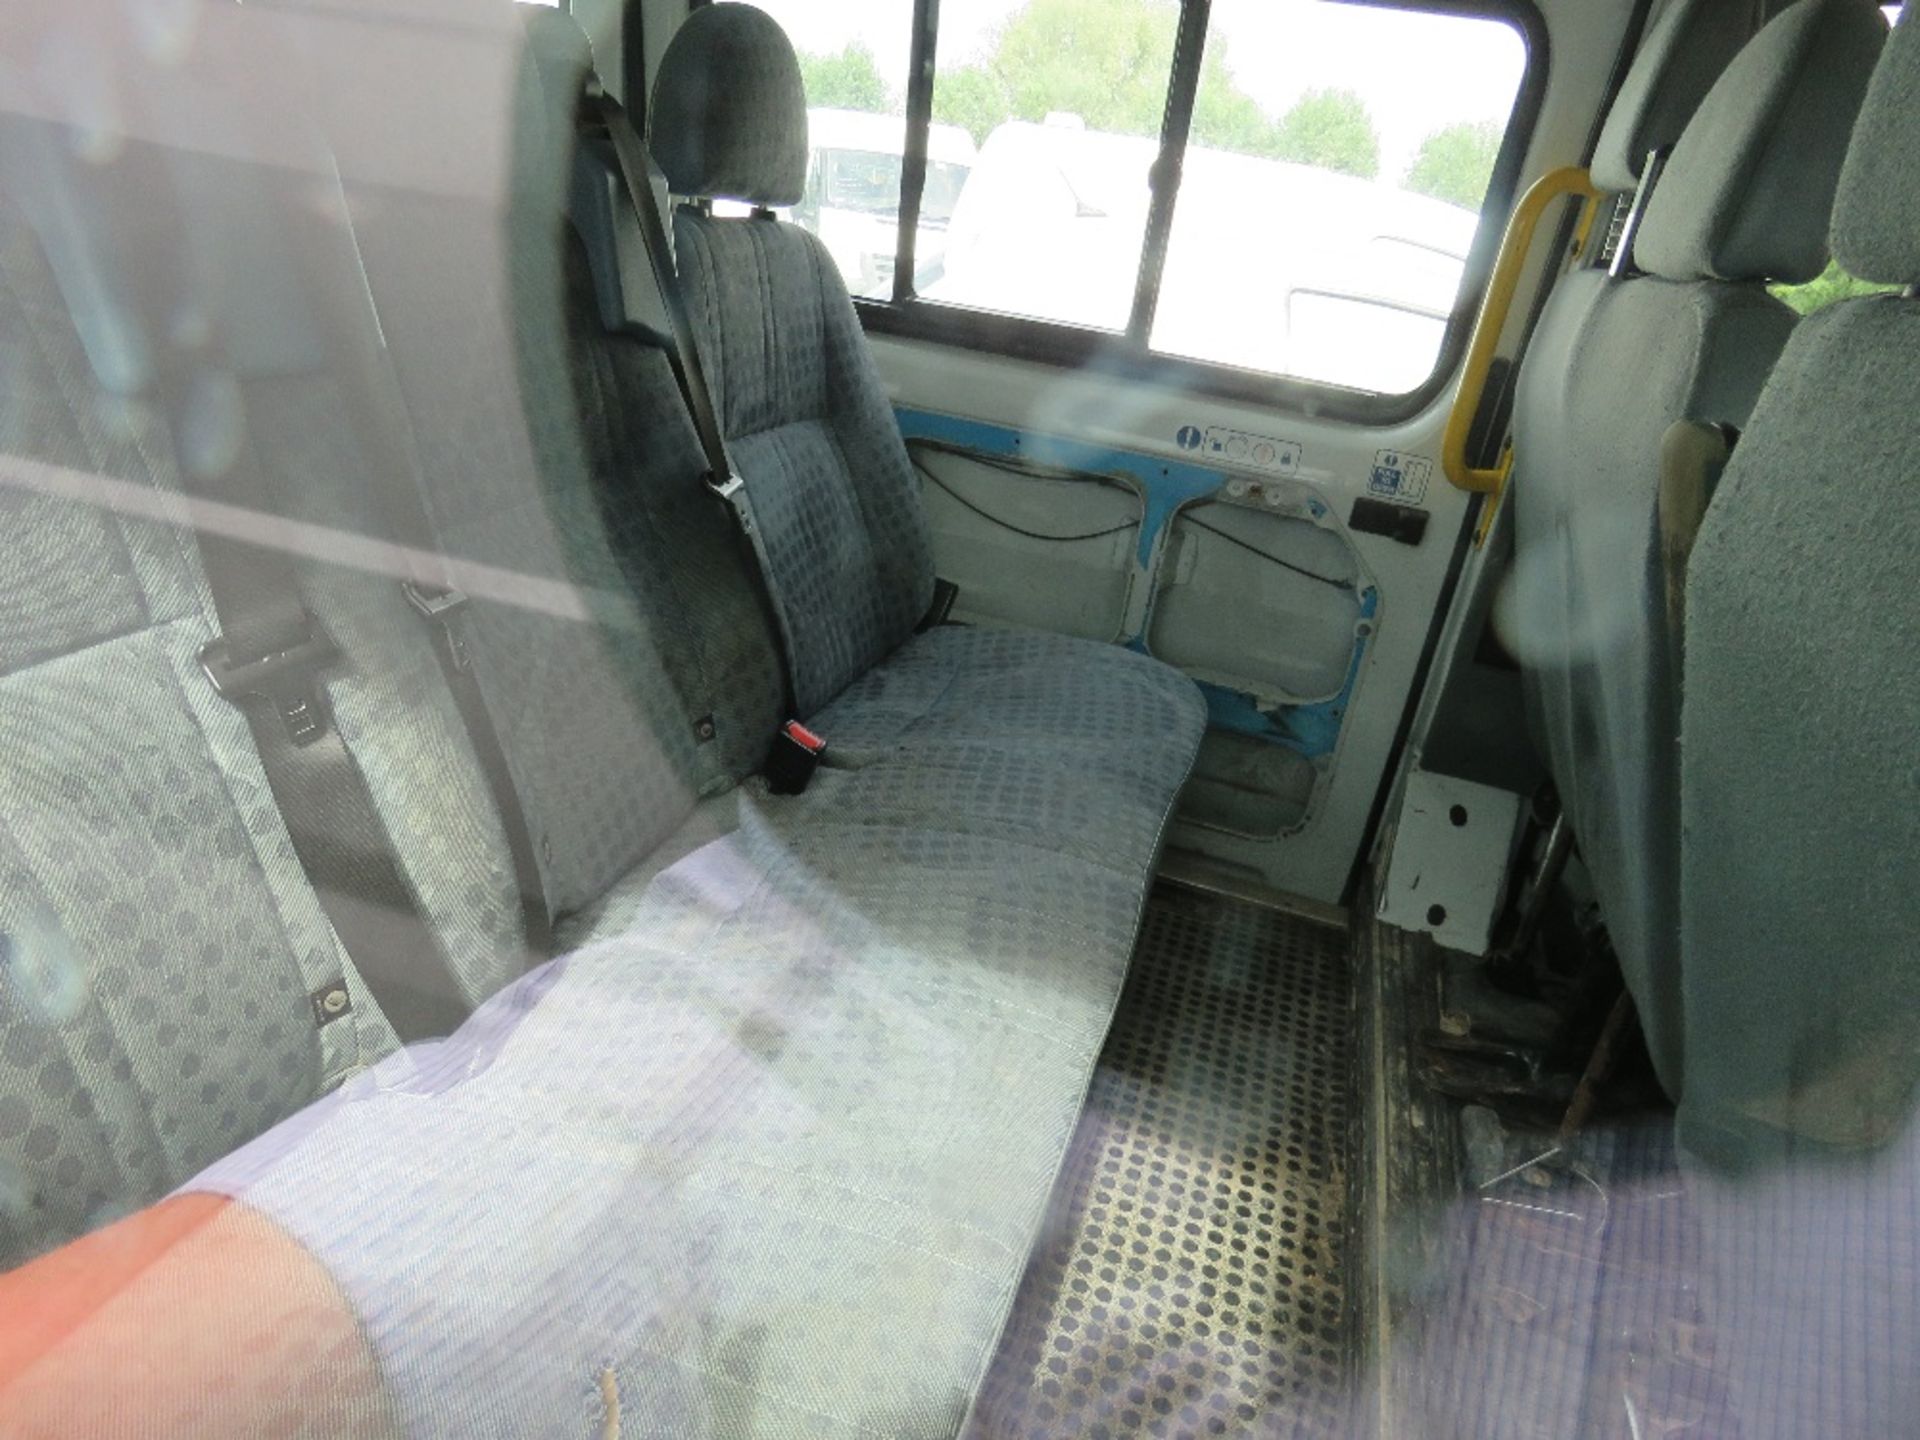 9 SEATER FORD TRANSIT MINI BUS WITH STORAGE BOOT REG: CV10 KLK TESTED TILL 22/2/21. DIRECT EX LOCAL - Image 7 of 7